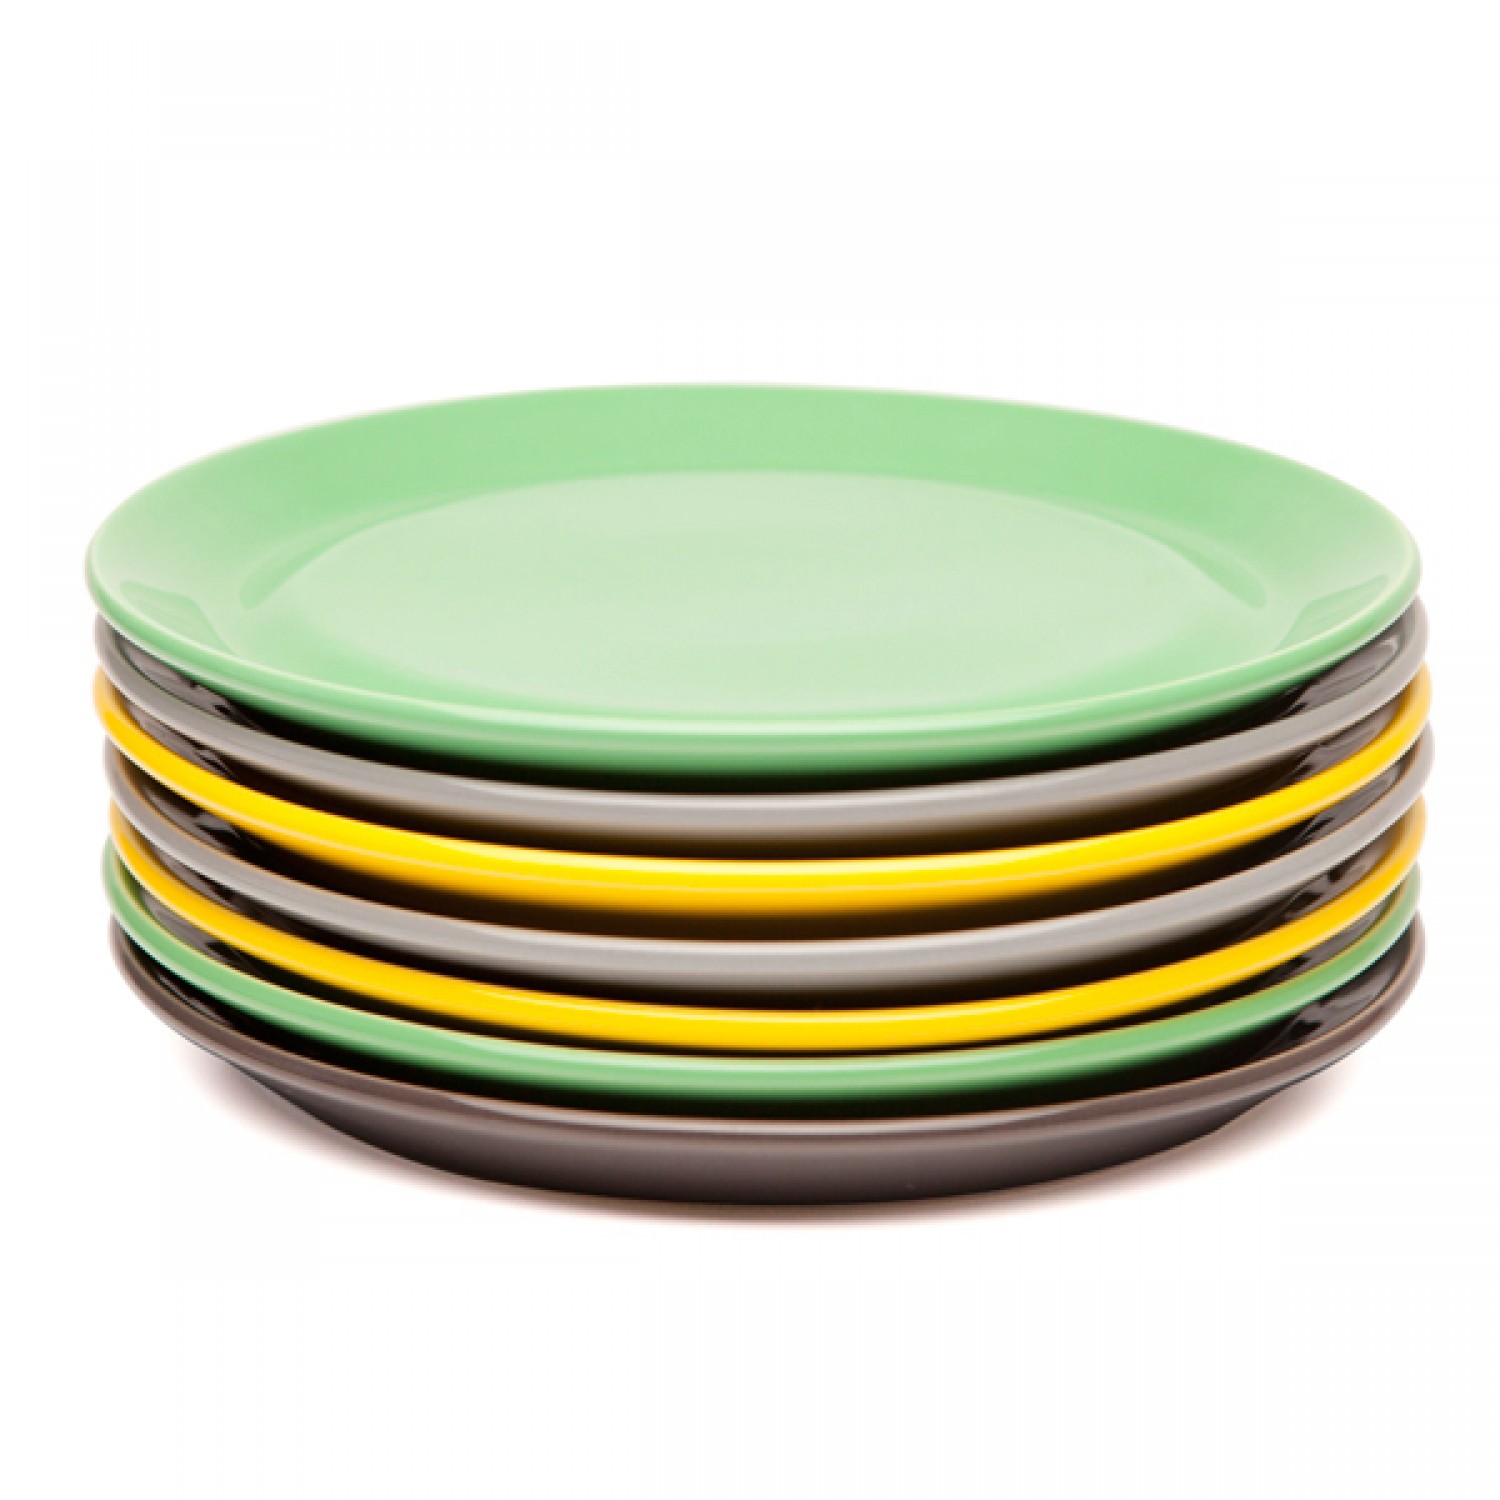 plate-stack-clipart-10.jpg